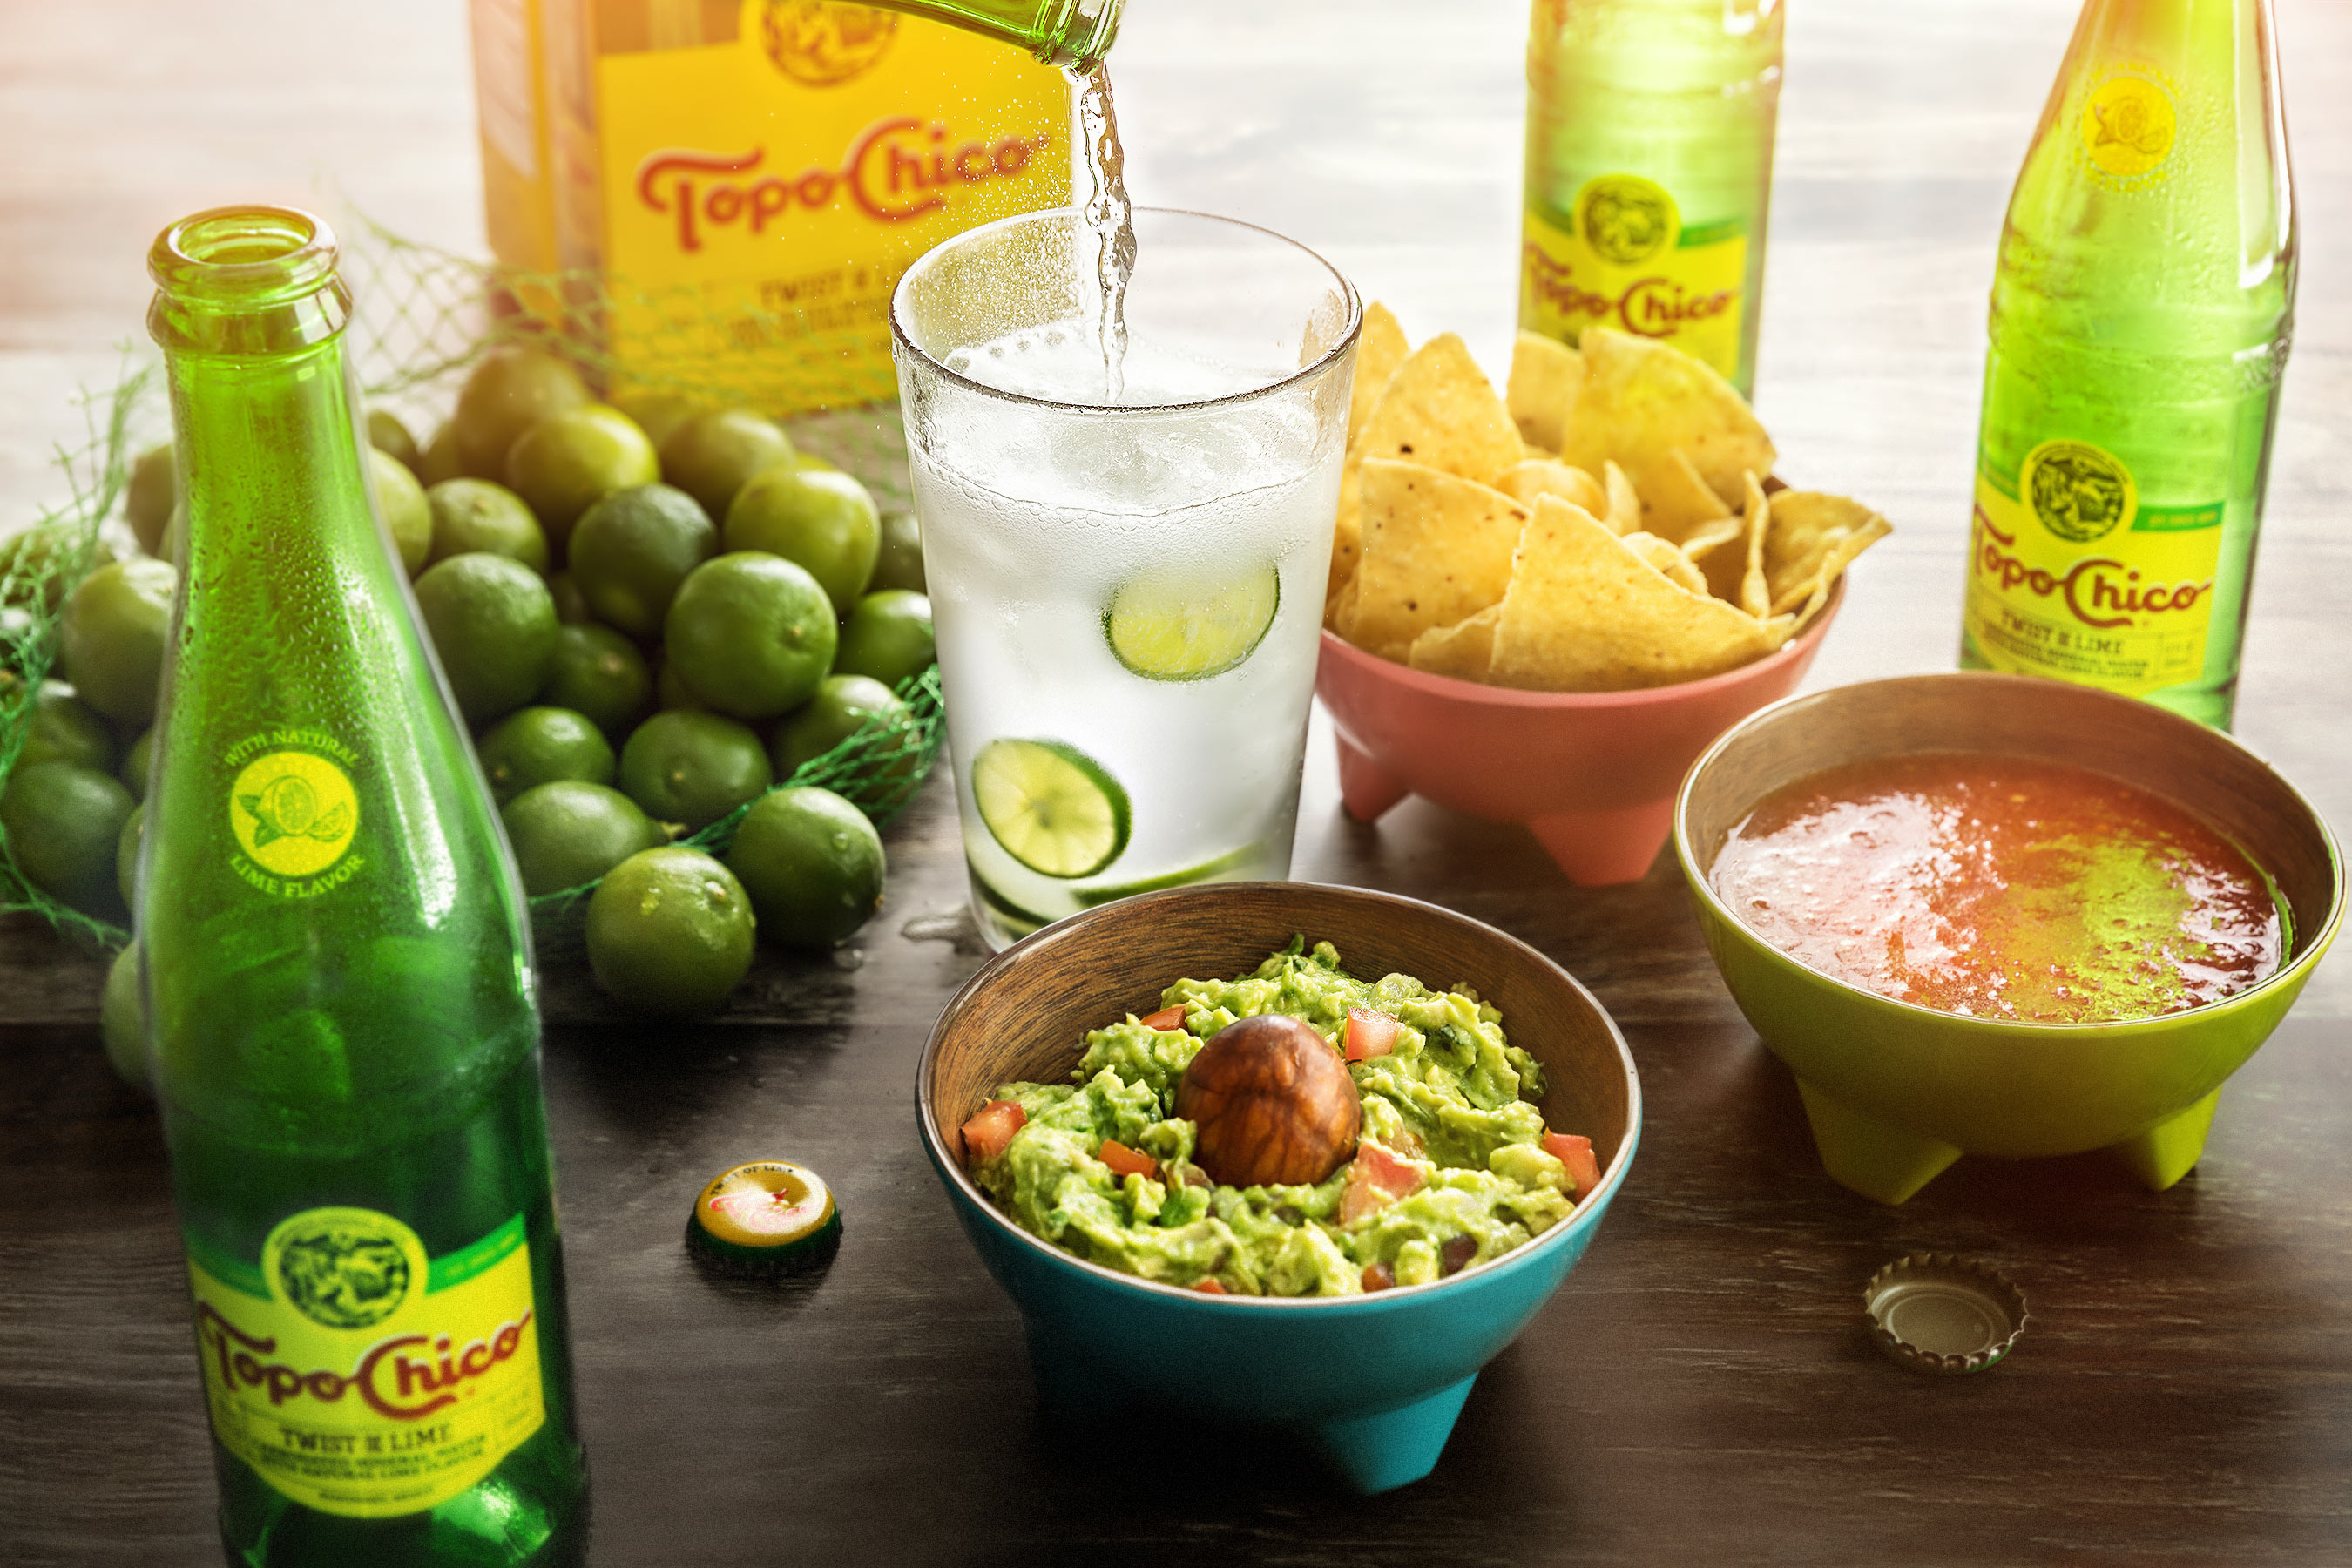 Pouring a glass of Topo Chico with bottles, guacamole, limes, chips & salsa